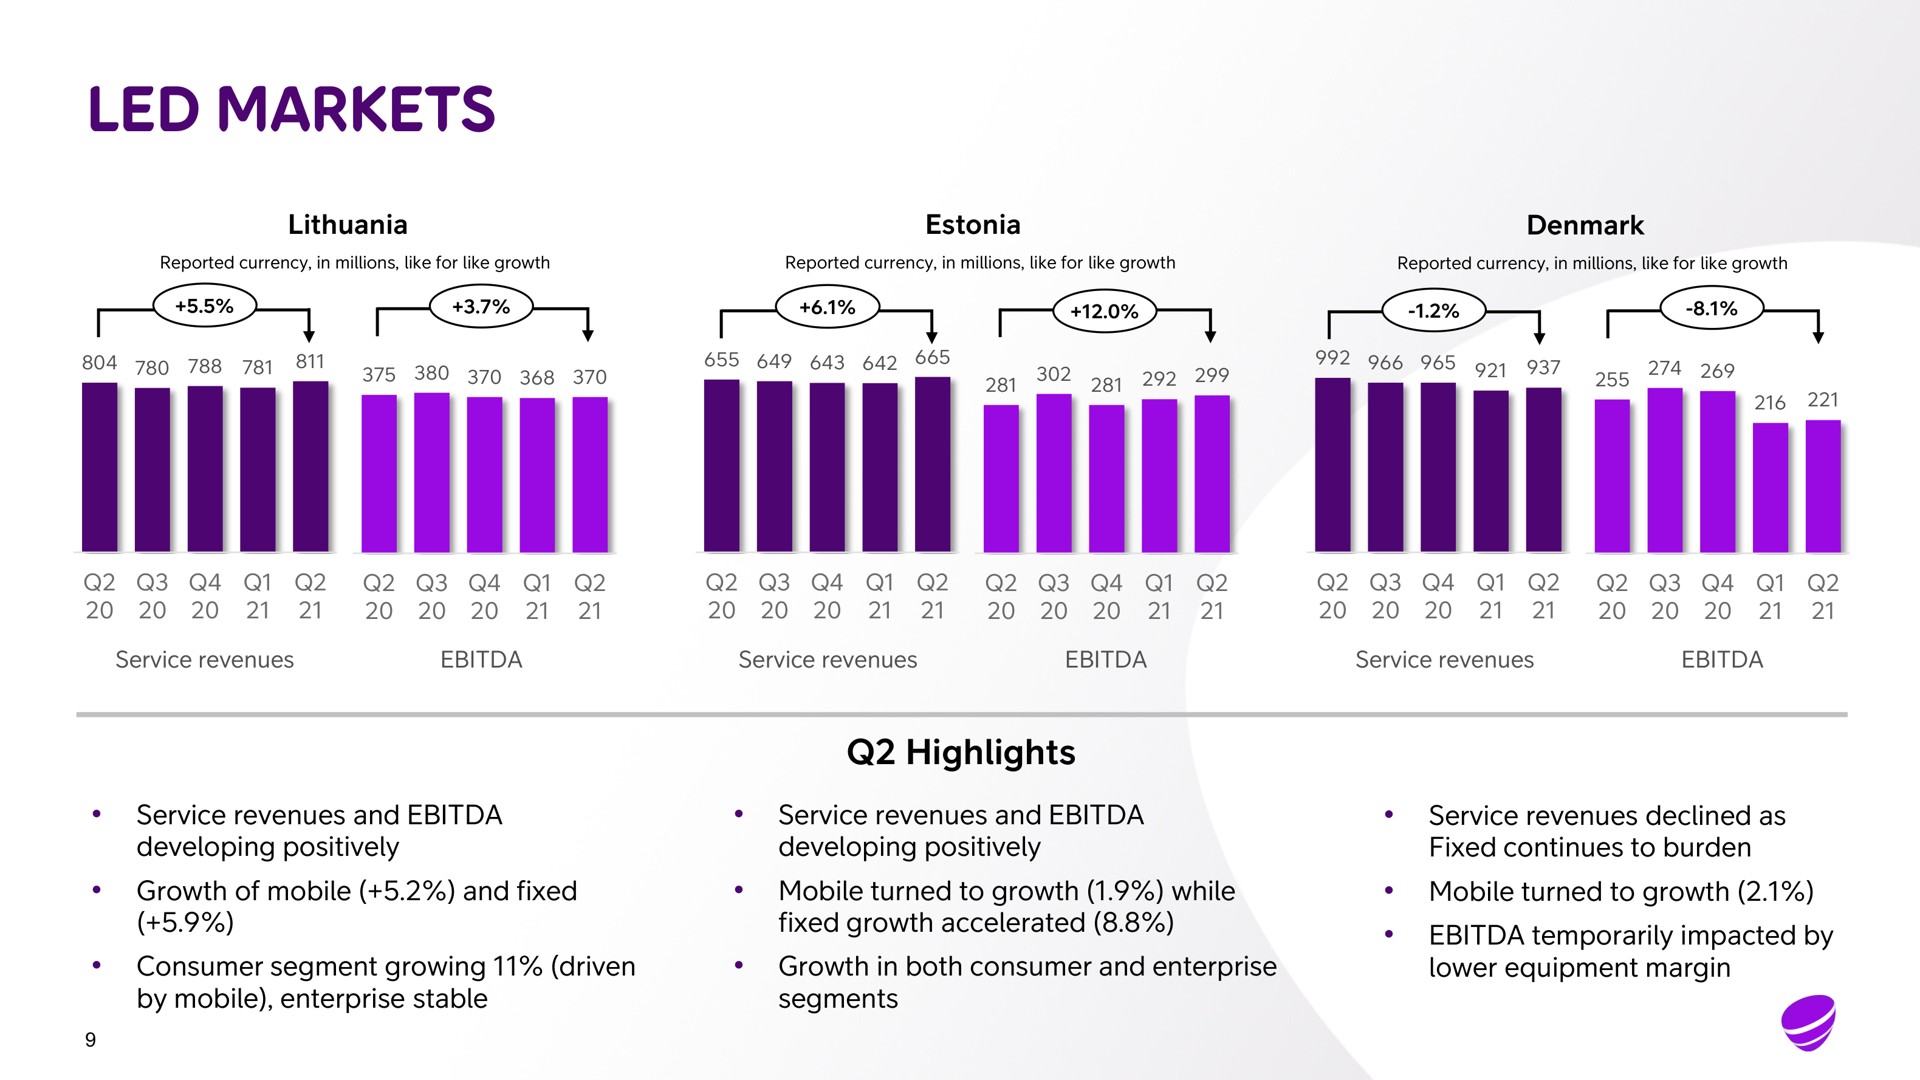 led markets highlights service revenues and developing positively service revenues and developing positively growth of mobile and fixed mobile turned to growth while fixed growth accelerated consumer segment growing driven growth in both consumer and enterprise by mobile enterprise stable segments service revenues declined as fixed continues to burden mobile turned to growth temporarily impacted by lower equipment margin an | Telia Company